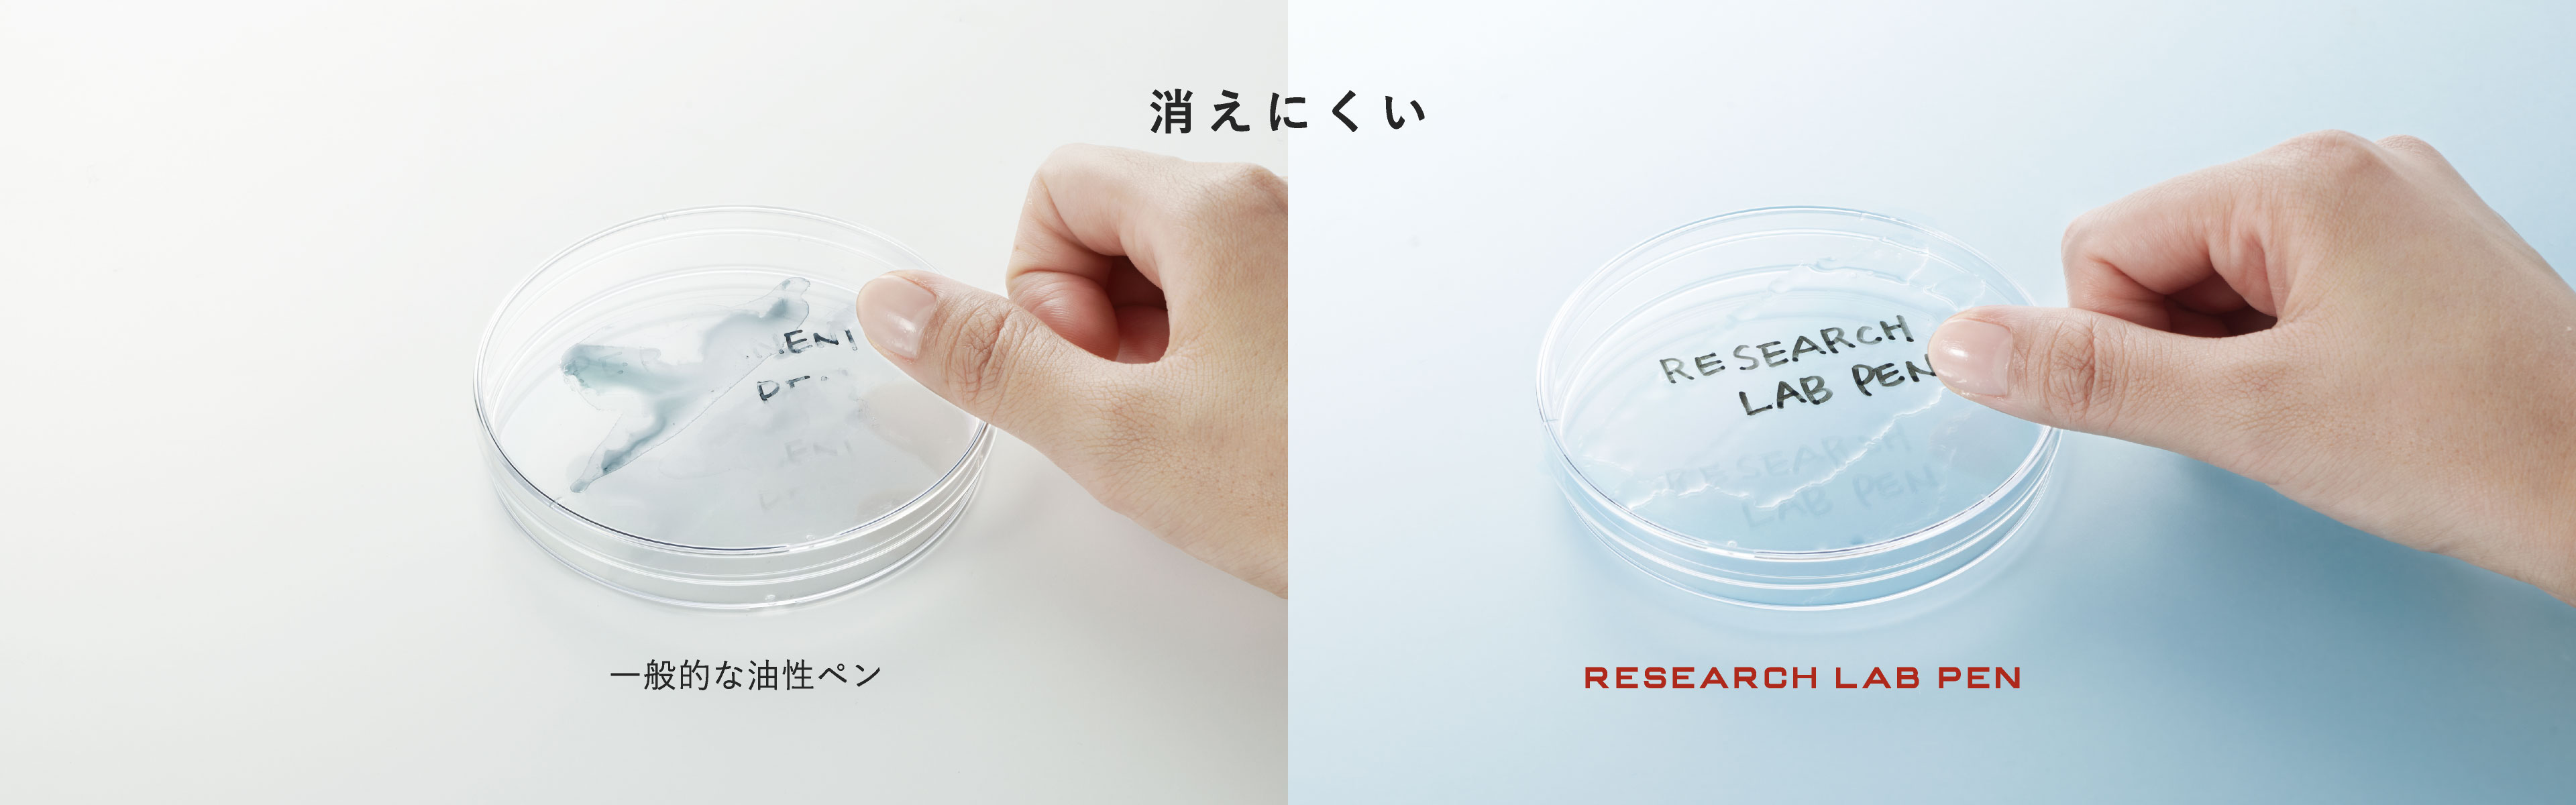 Research Lab Pen (alcohol-resistant type)